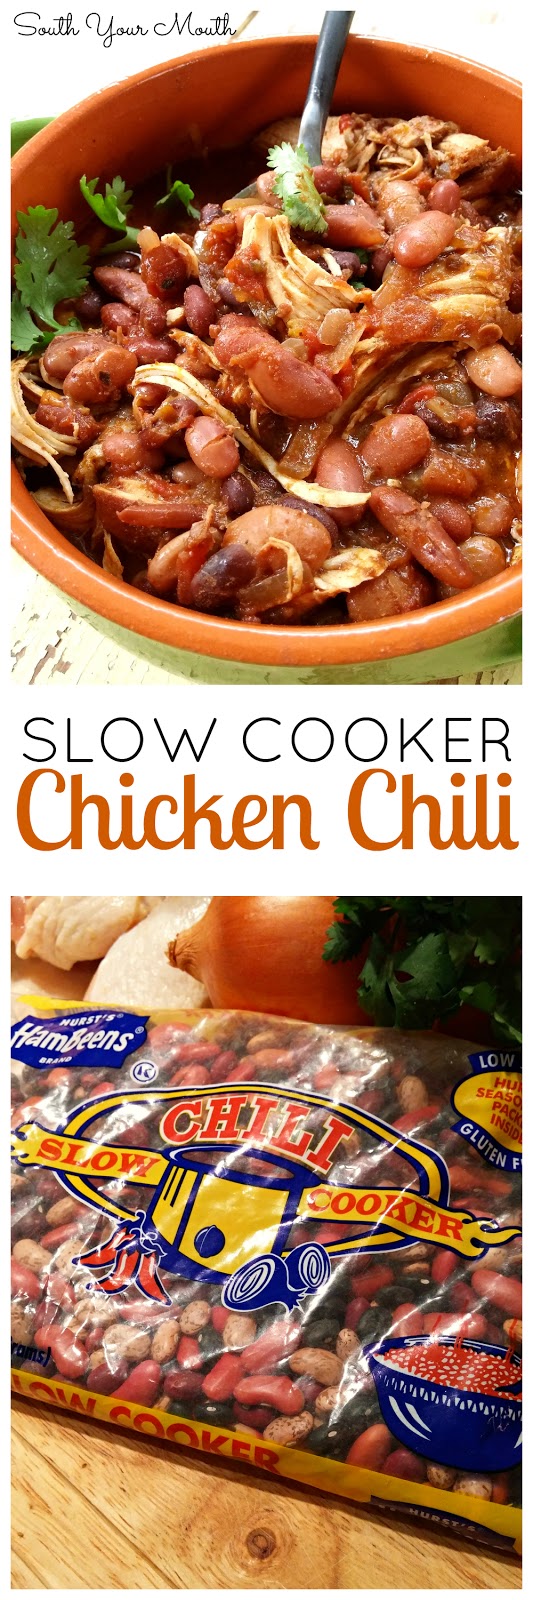 Slow Cooker Chicken Chili simmers low and slow in your crock pot for perfectly seasoned and tender chicken chili.